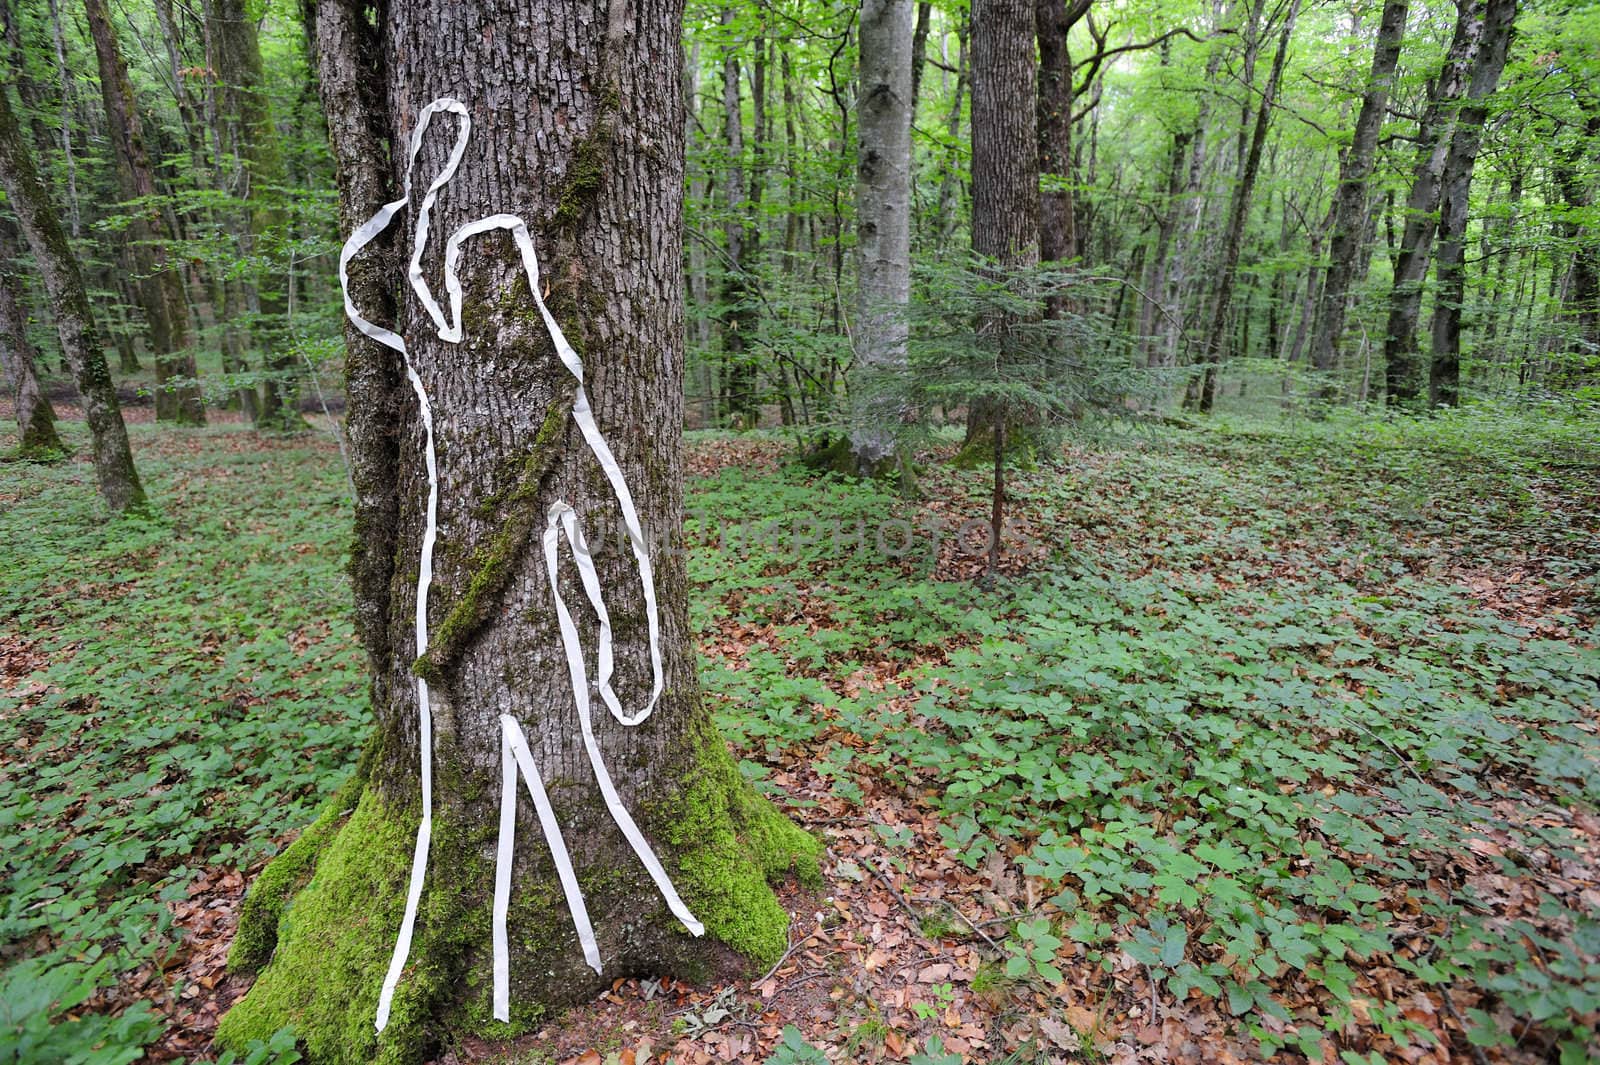 A scene of crime figure on a tree trunk in woodland. Space for text to the right, against the undergrowth.